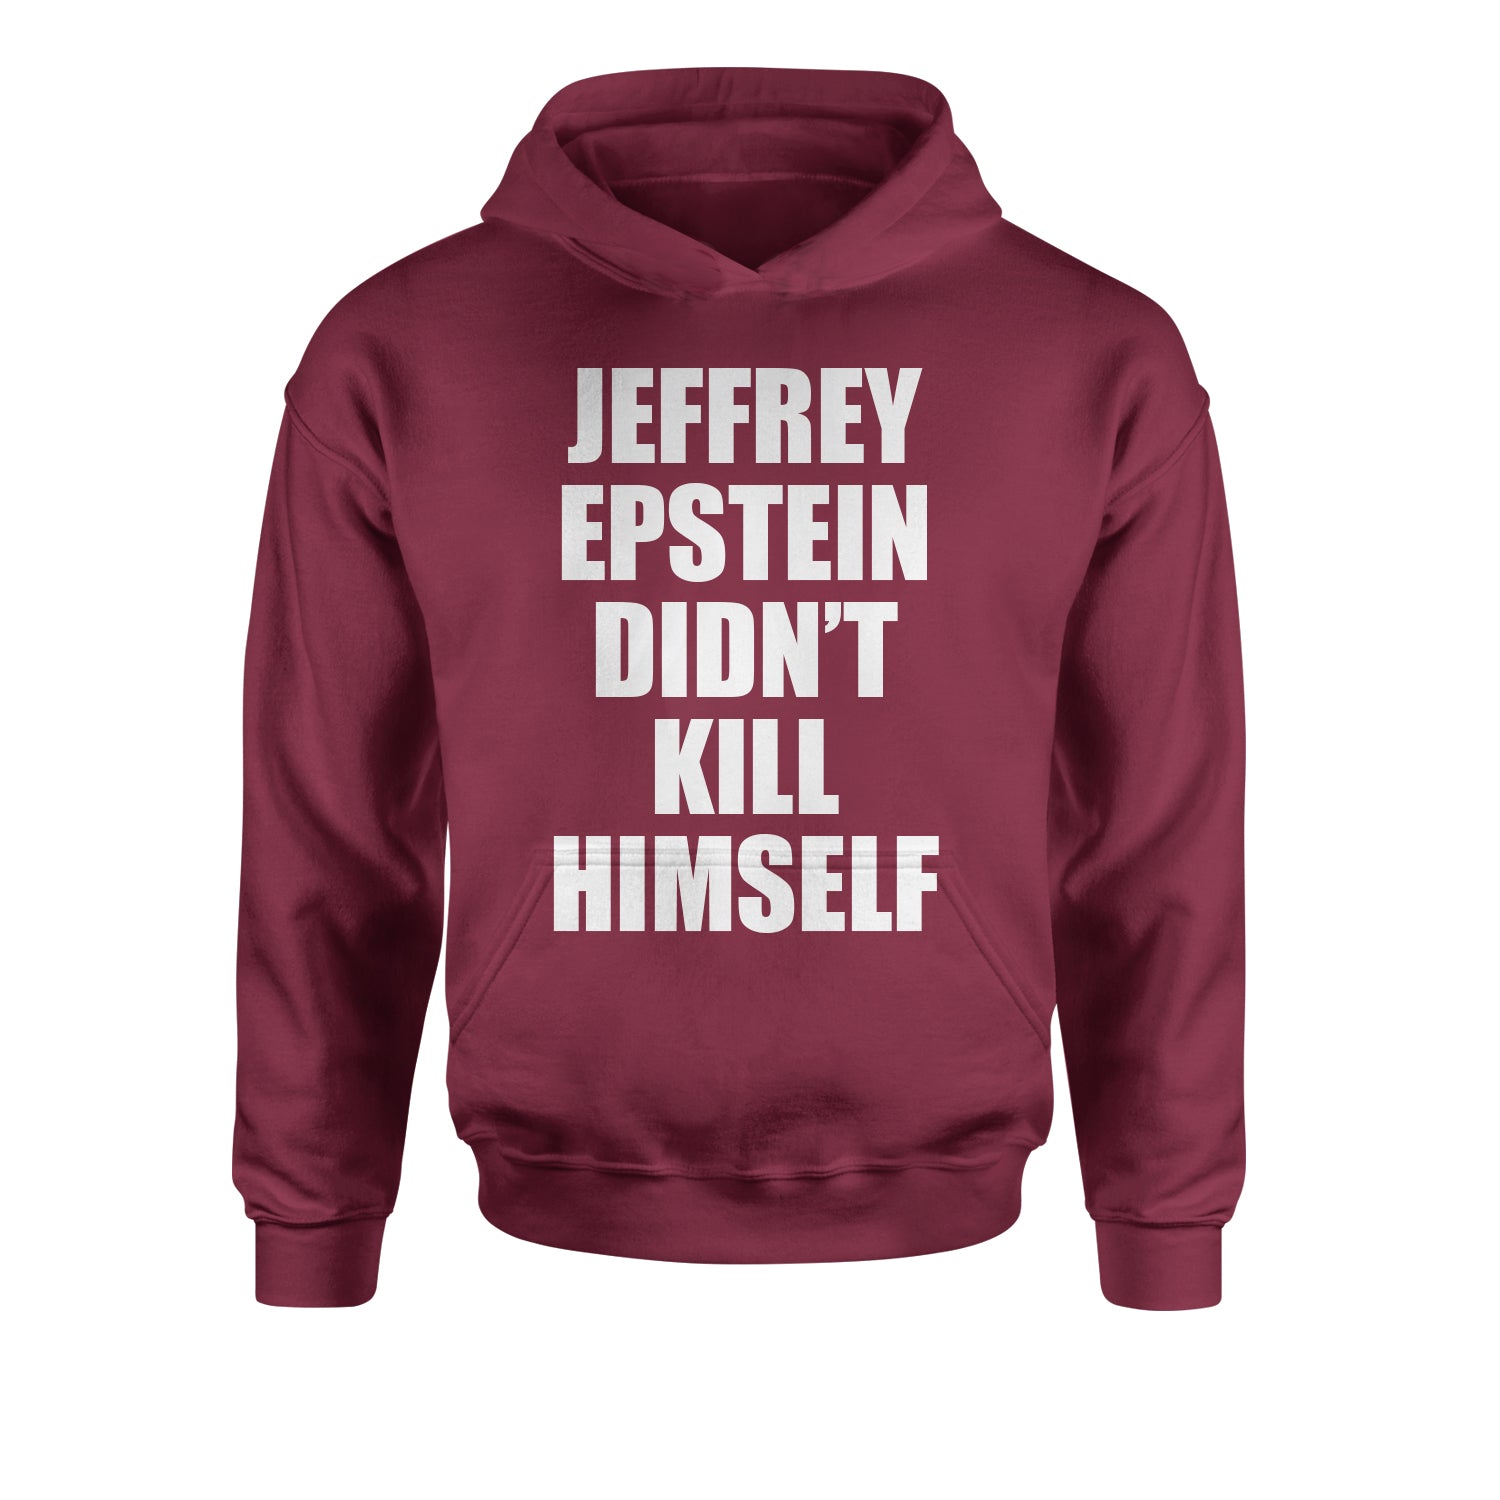 Jeffrey Epstein Didn't Kill Himself Youth-Sized Hoodie coverup, homicide, murder, ssadgk, trump by Expression Tees